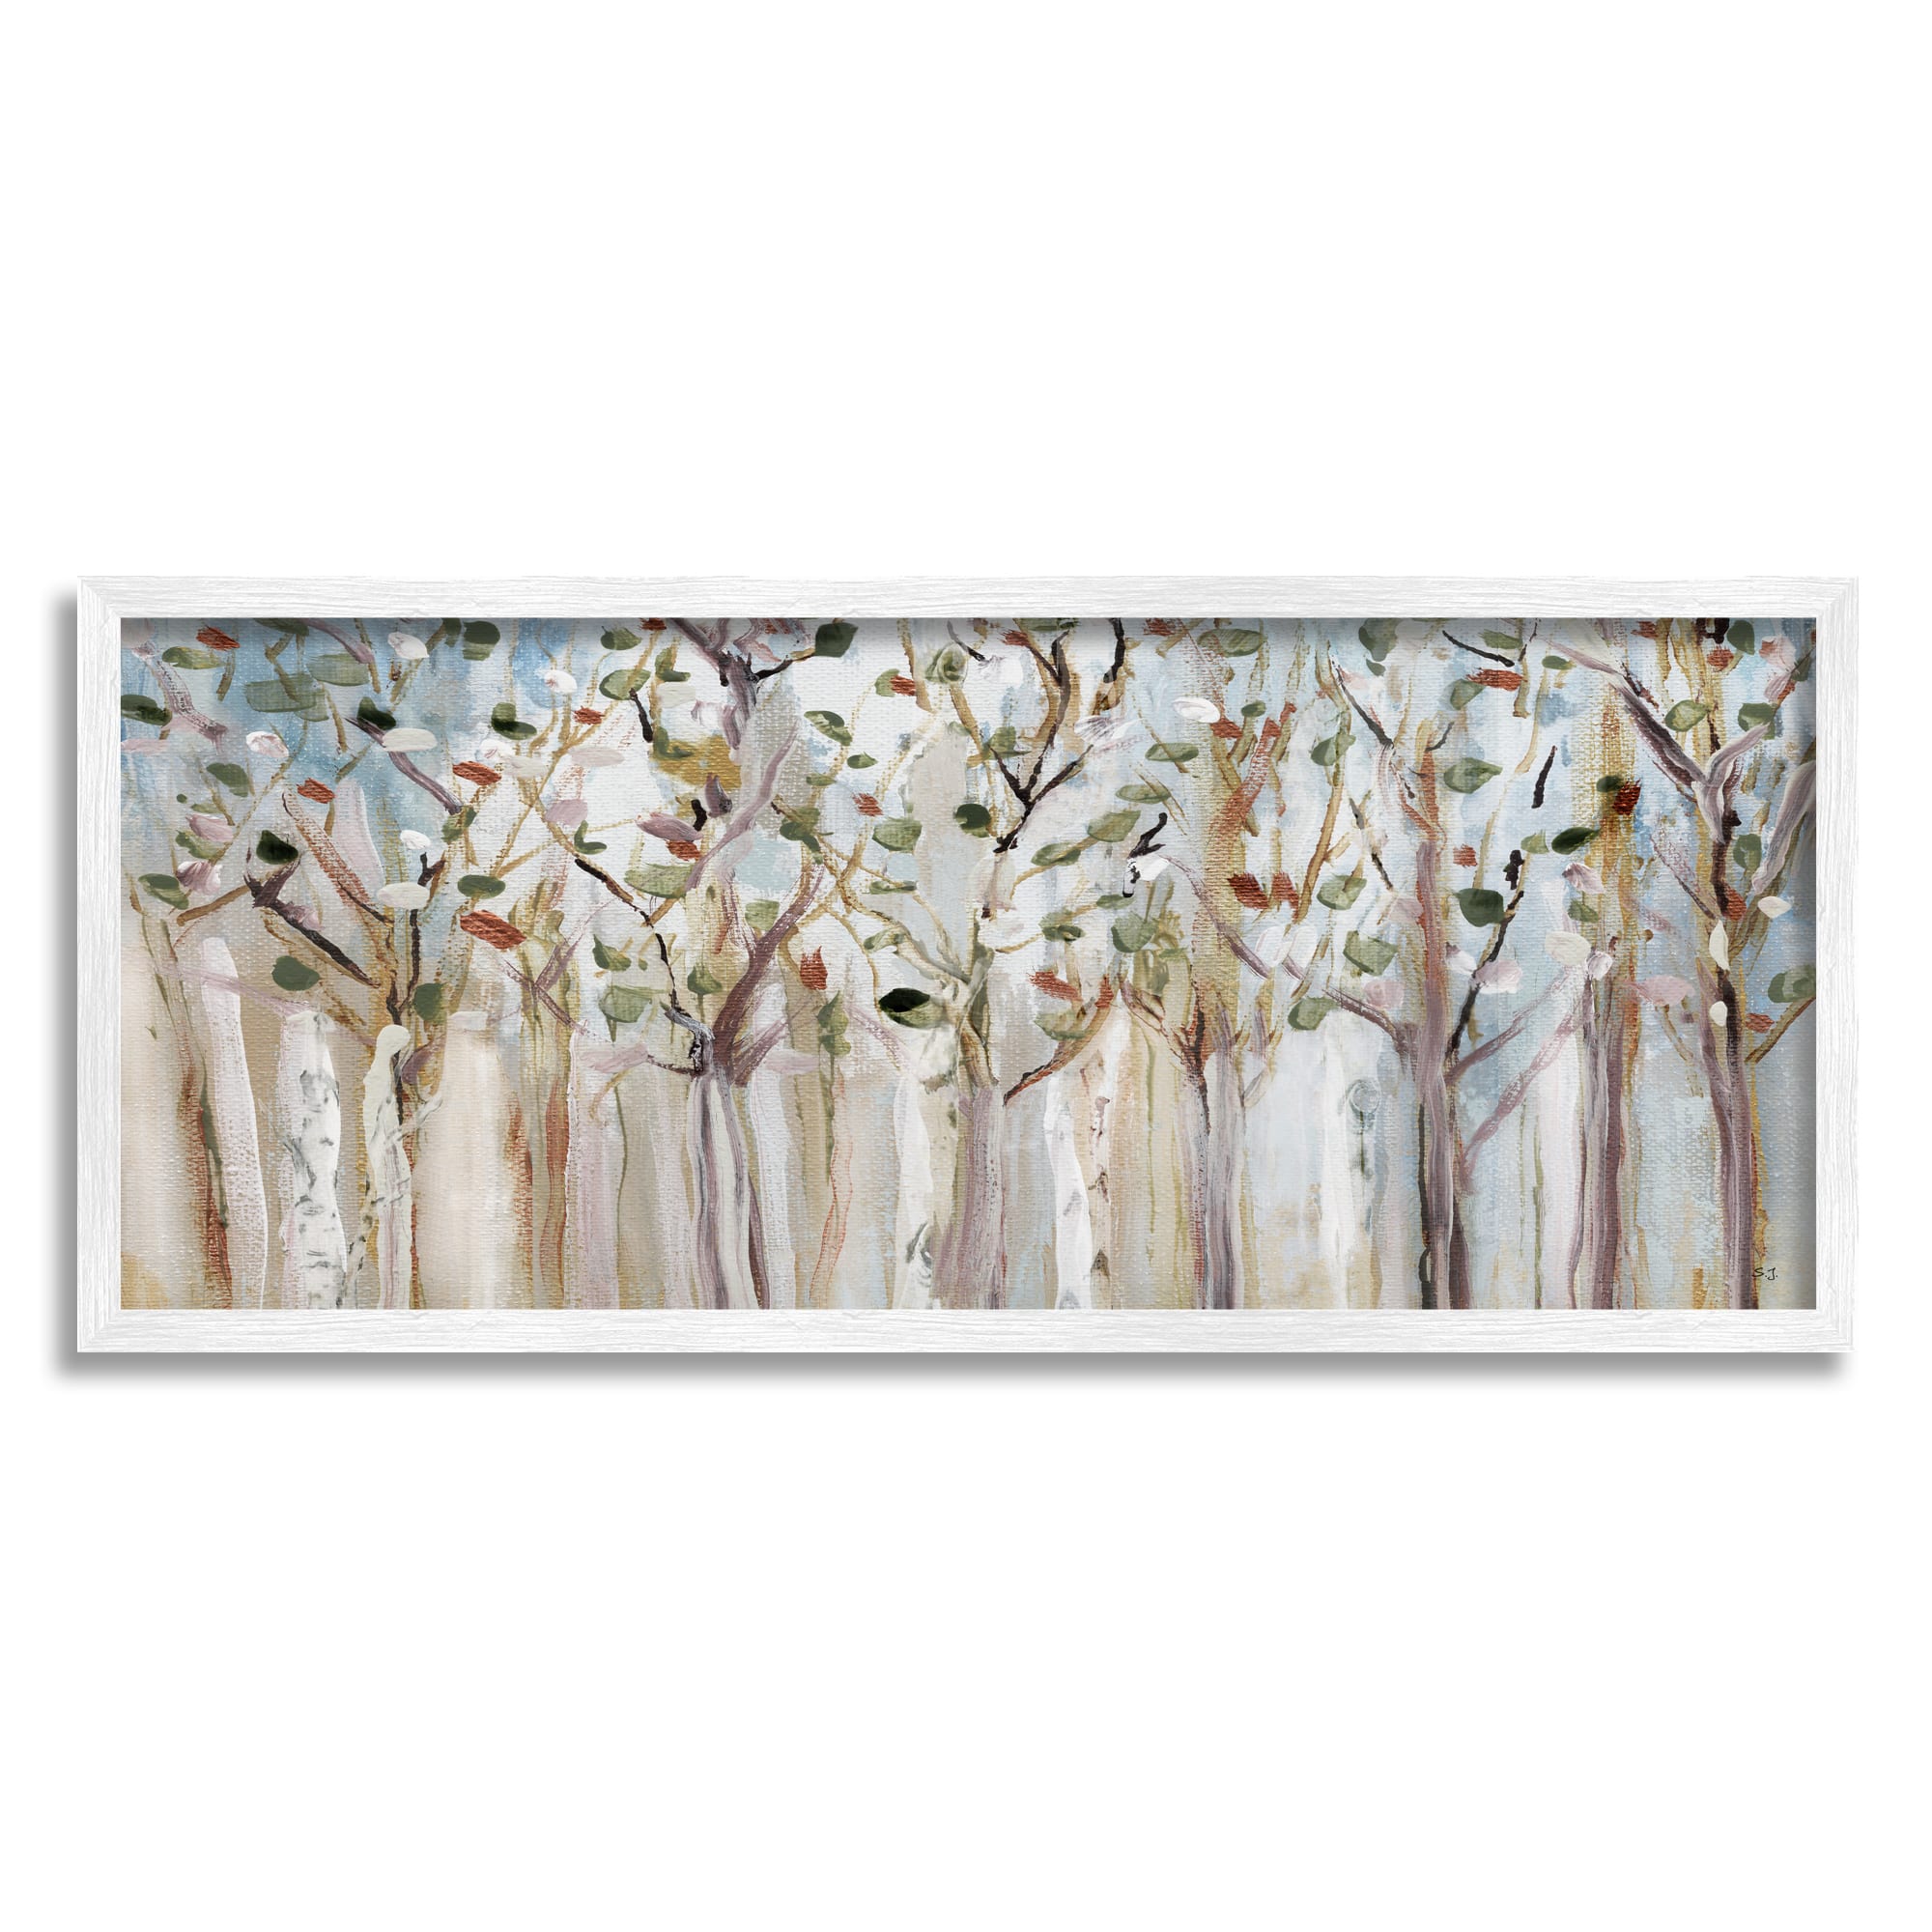 Stupell Industries Bare Branch Trees Birch Forest Fall Twigs Abstract Painting Framed Giclee Art